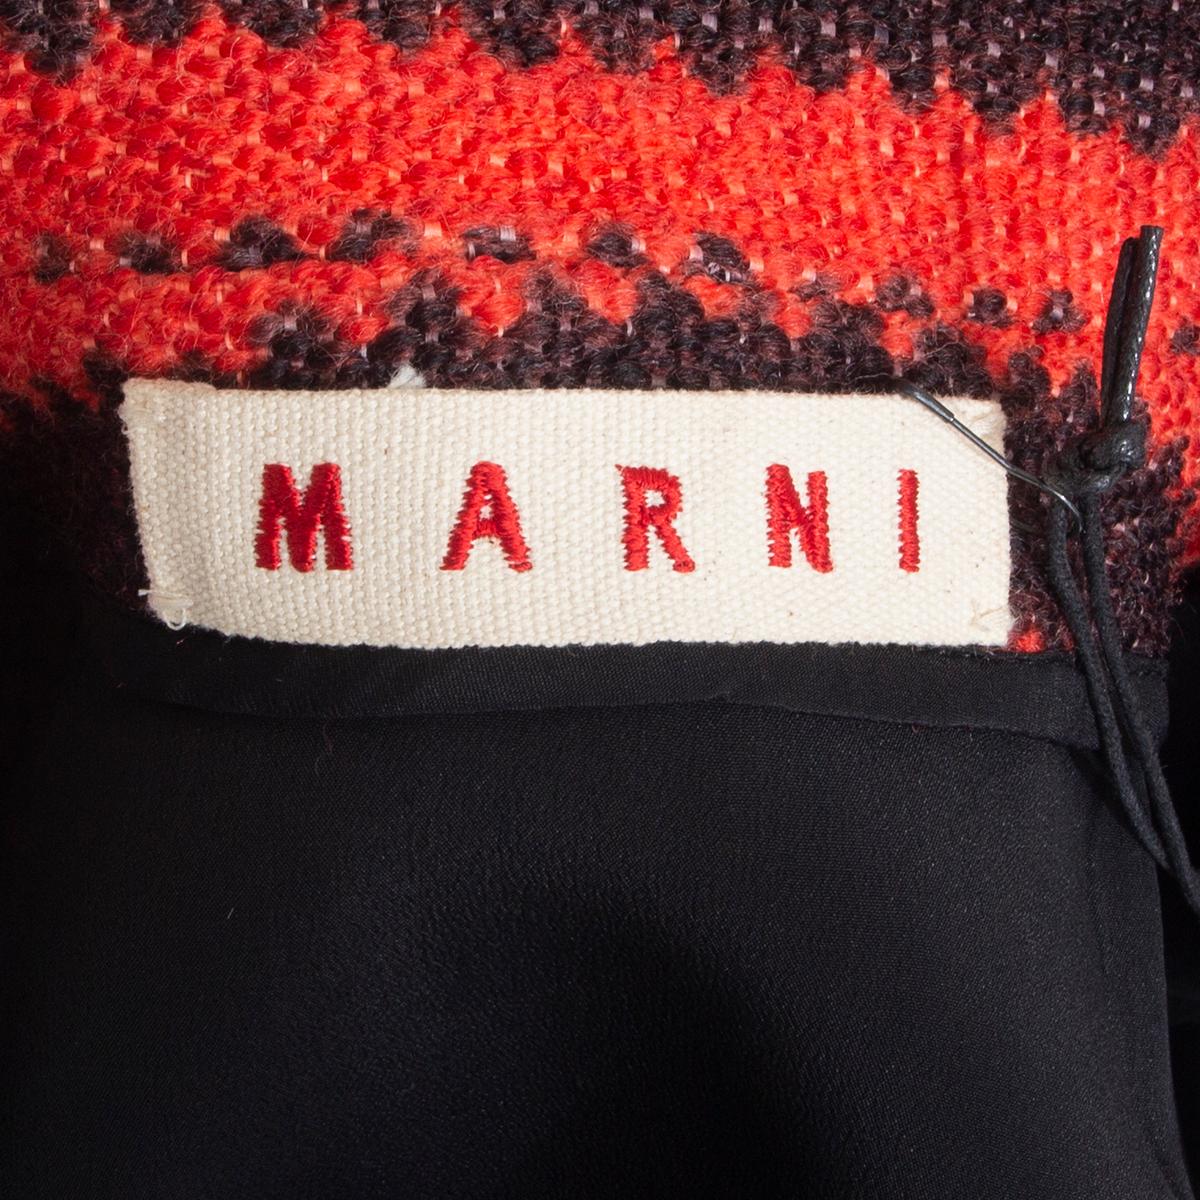 MARNI black & coral wool STRIPED 3/4 SLEEVE KNIT Peacoat Coat Jacket 40 S For Sale 1